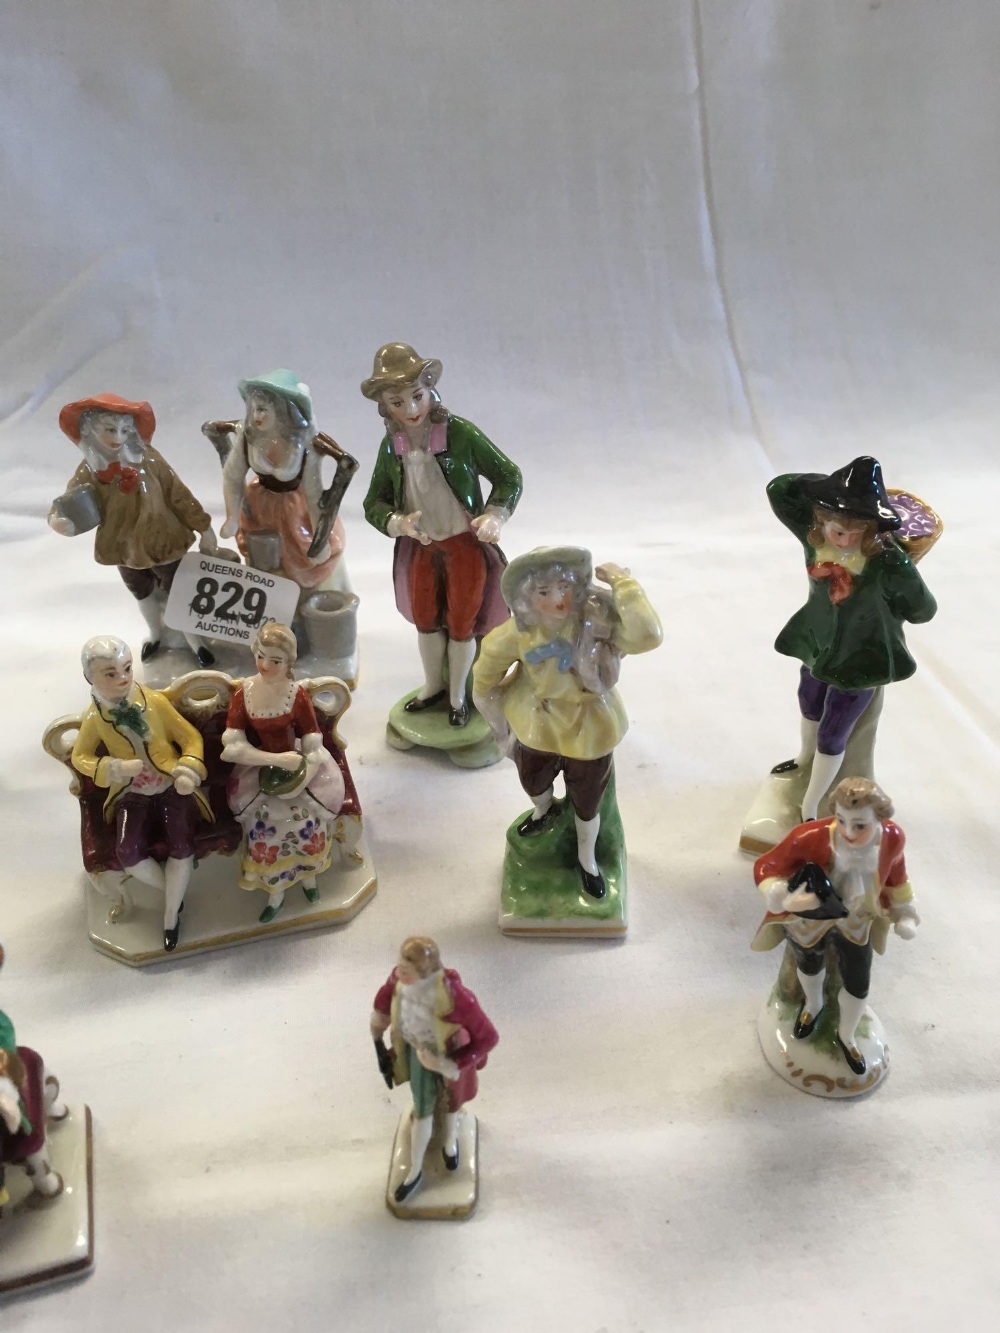 SHELF OF SMALL PORCELAIN FIGURES, MOSTLY WITH CROWN OVER 'N' MARK - Image 3 of 13